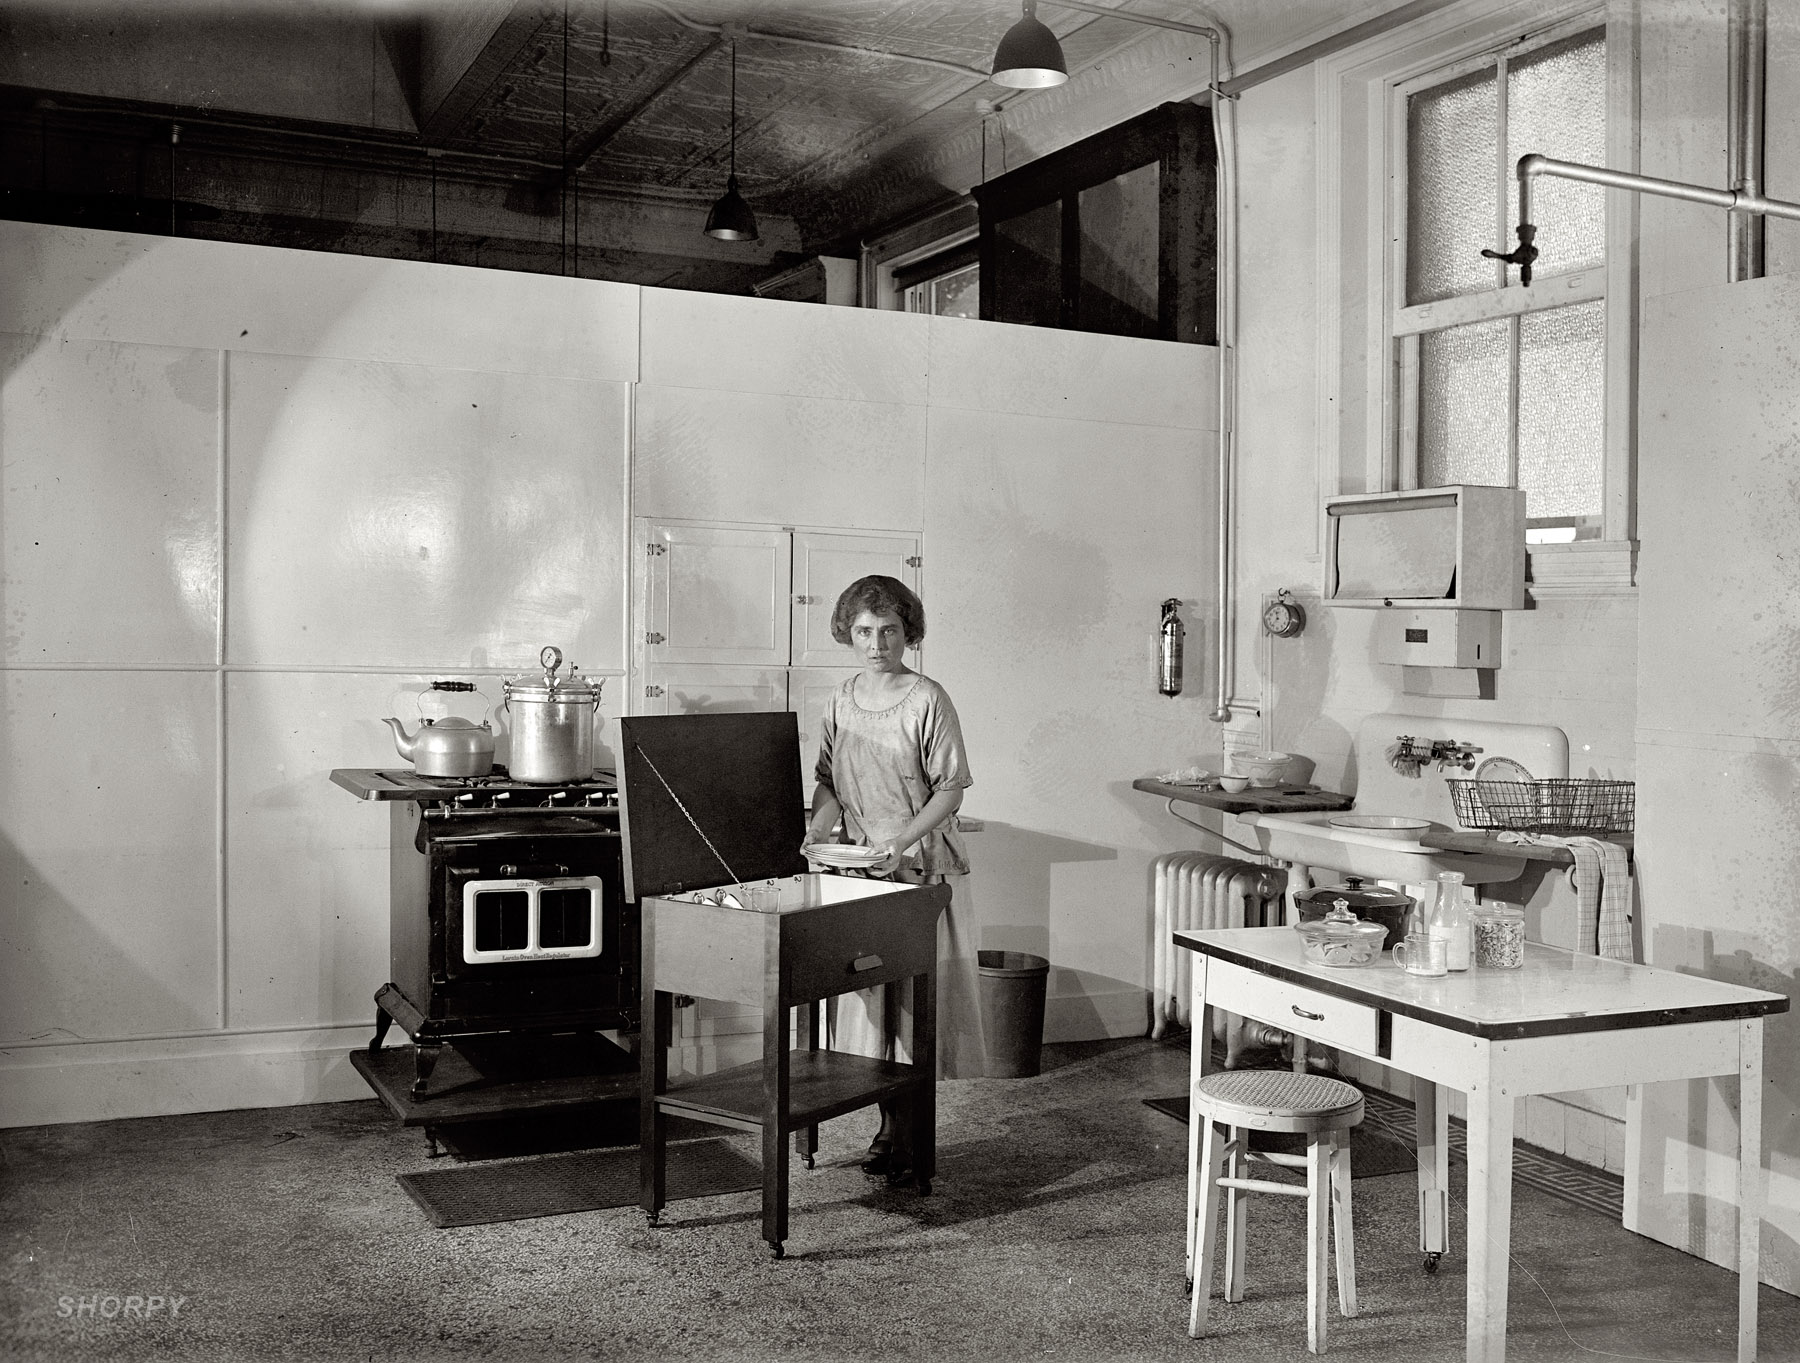 September 6, 1922. "Miss Elizabeth U. Hoffman." Who might be one teacup short of a place setting. National Photo Co. Collection glass negative. View full size.